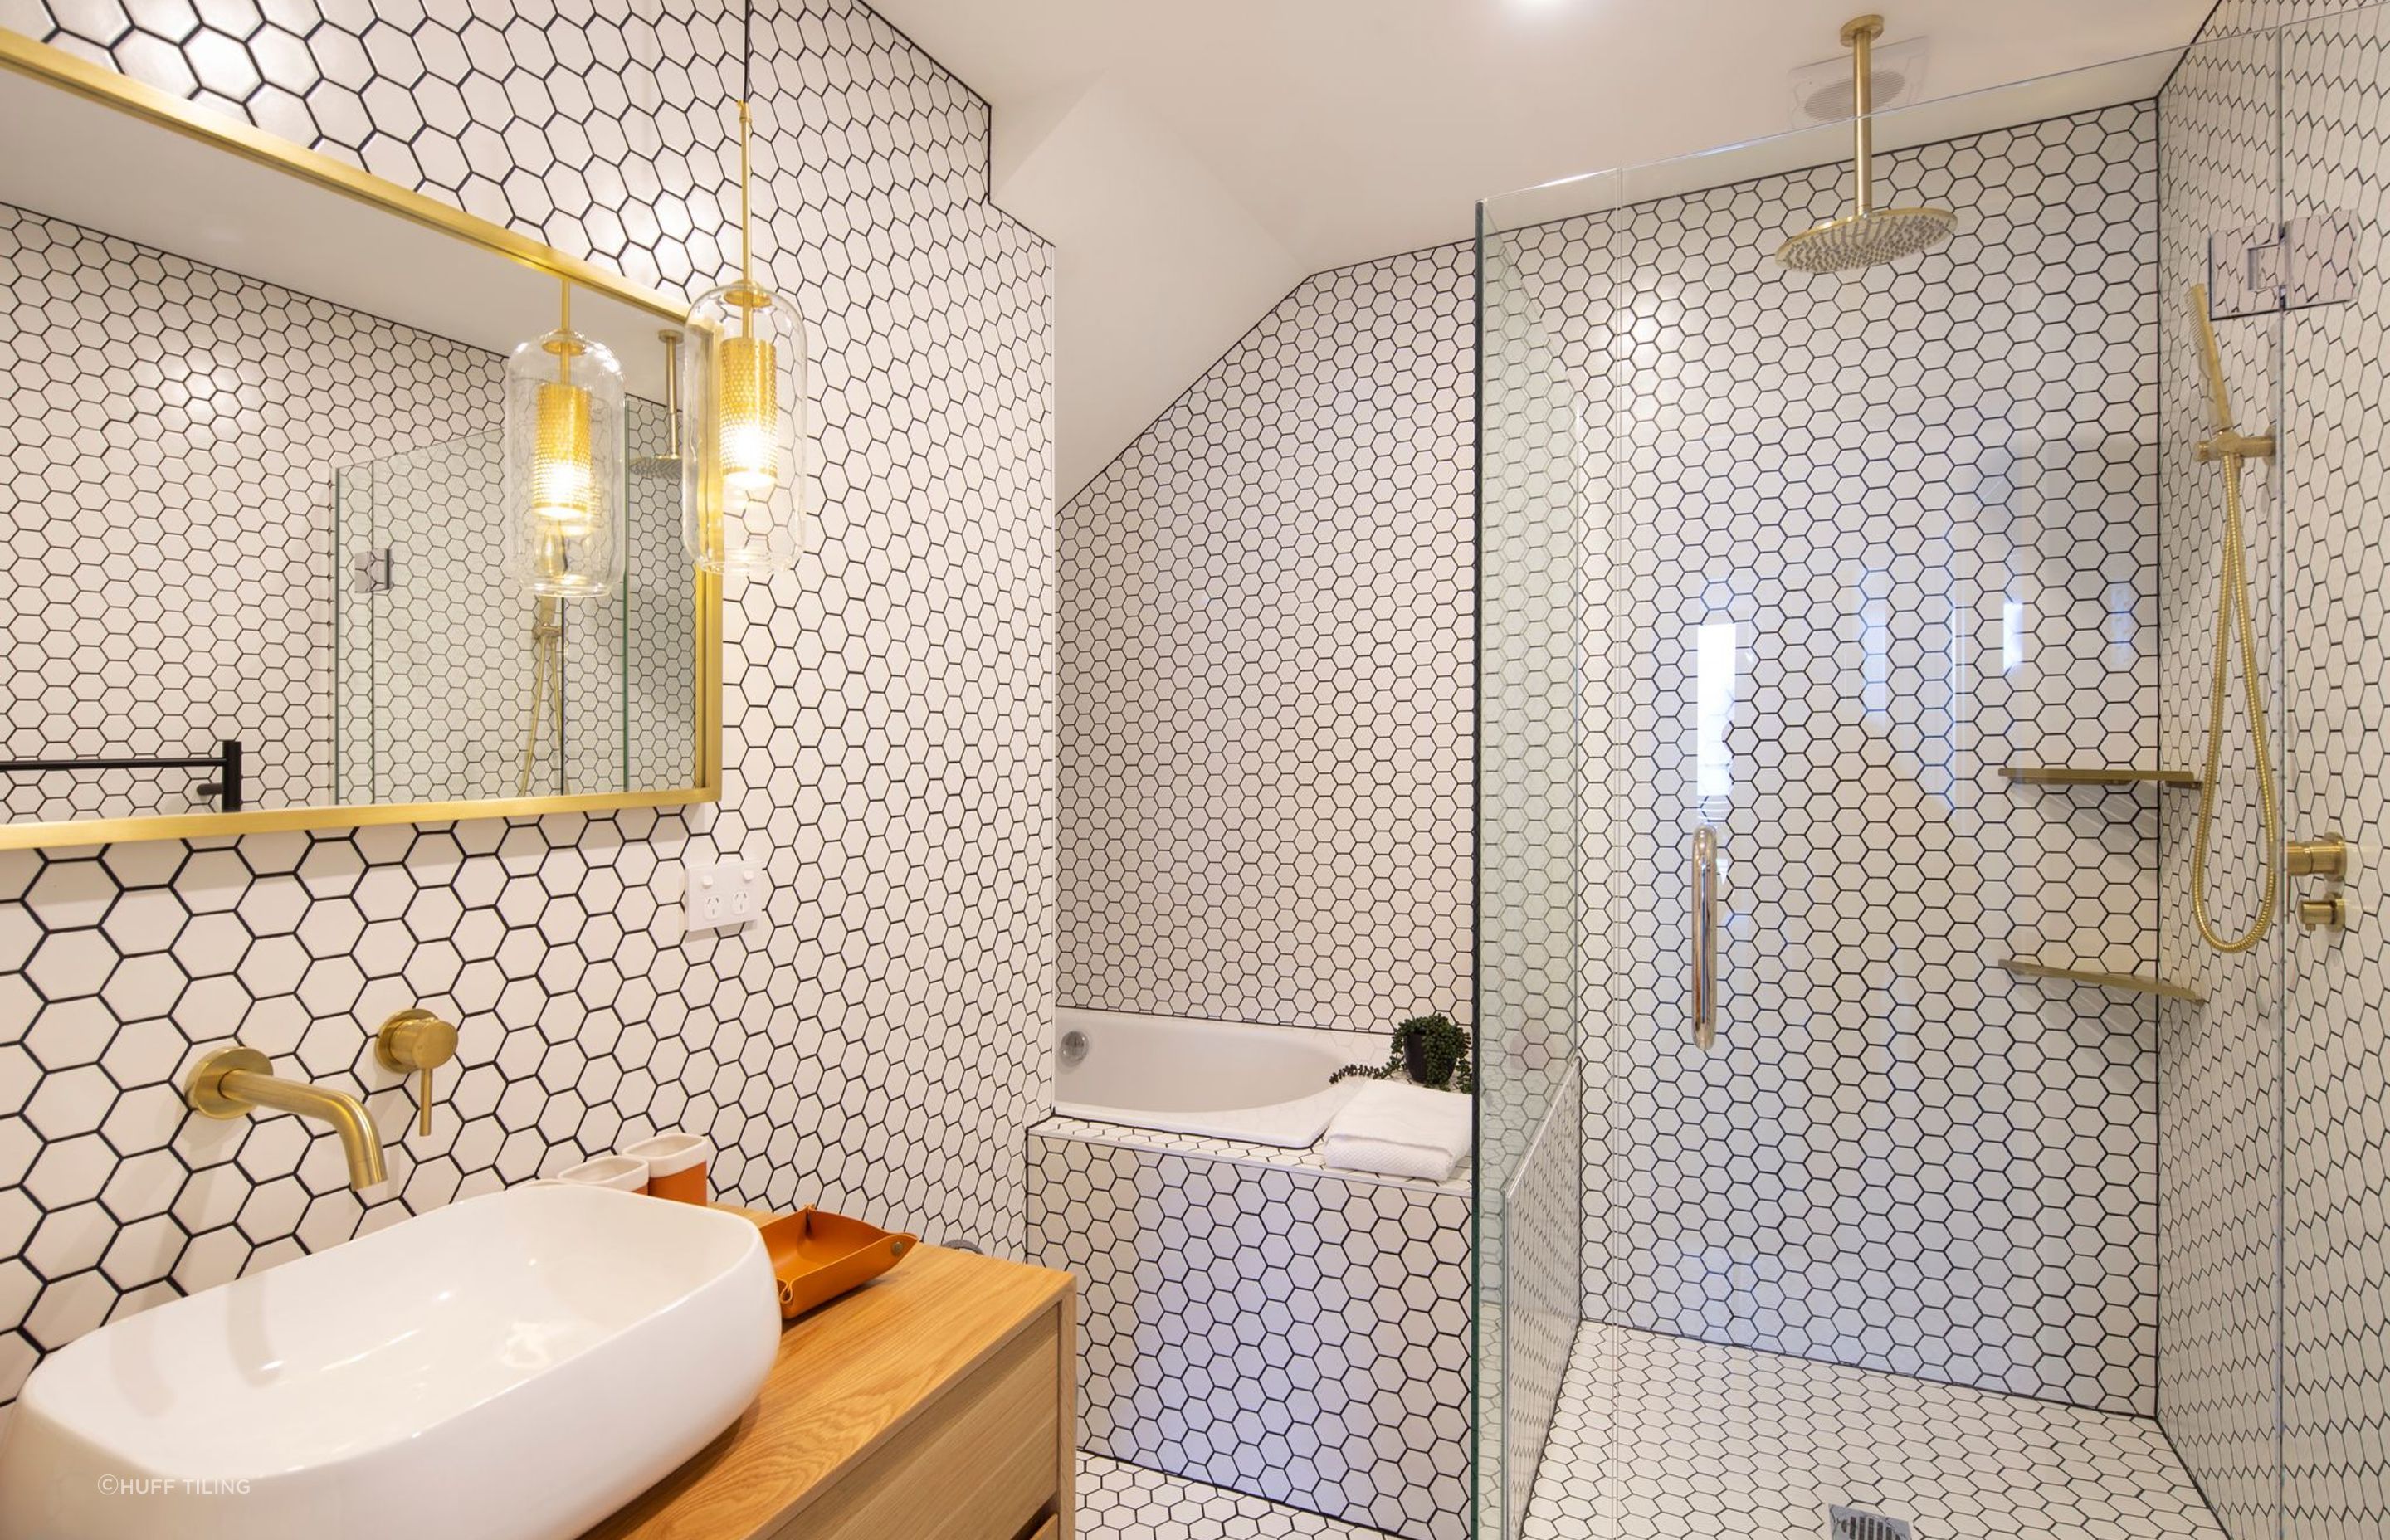 Mosaic tile bathroom styling from floor to walls and bathtub surrounds create an eye-catching aesthetic.